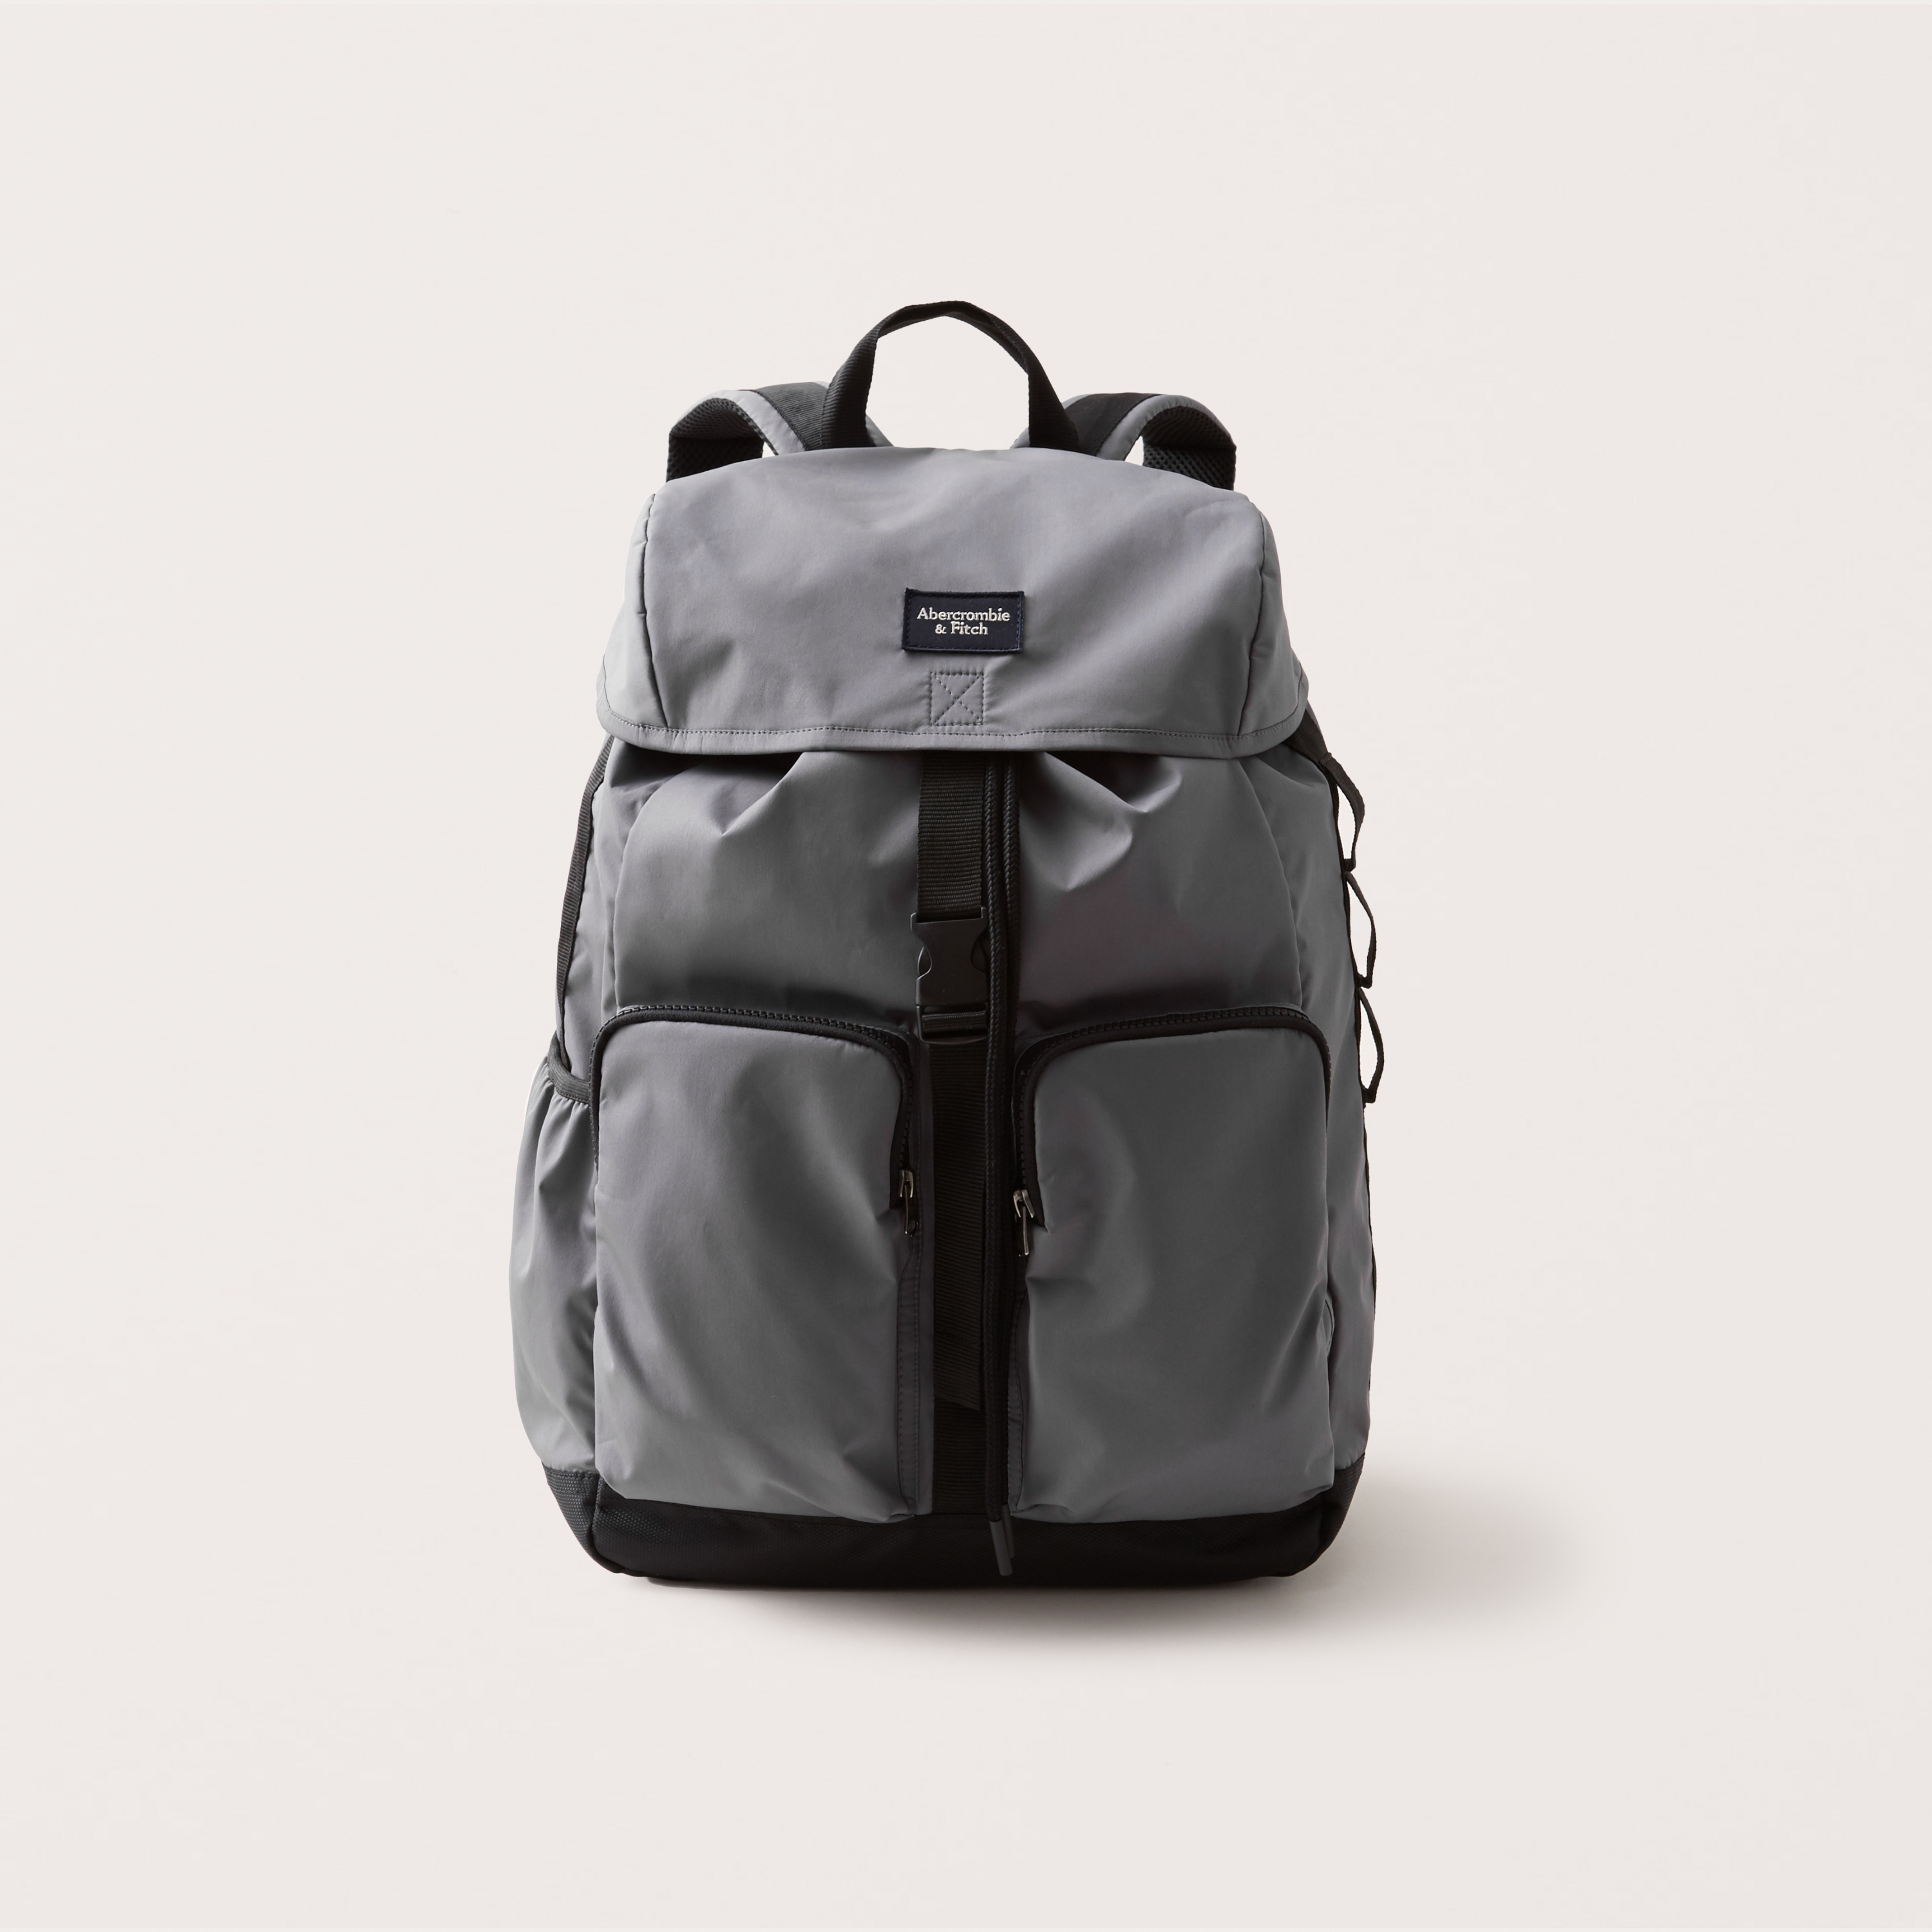 abercrombie fitch backpack